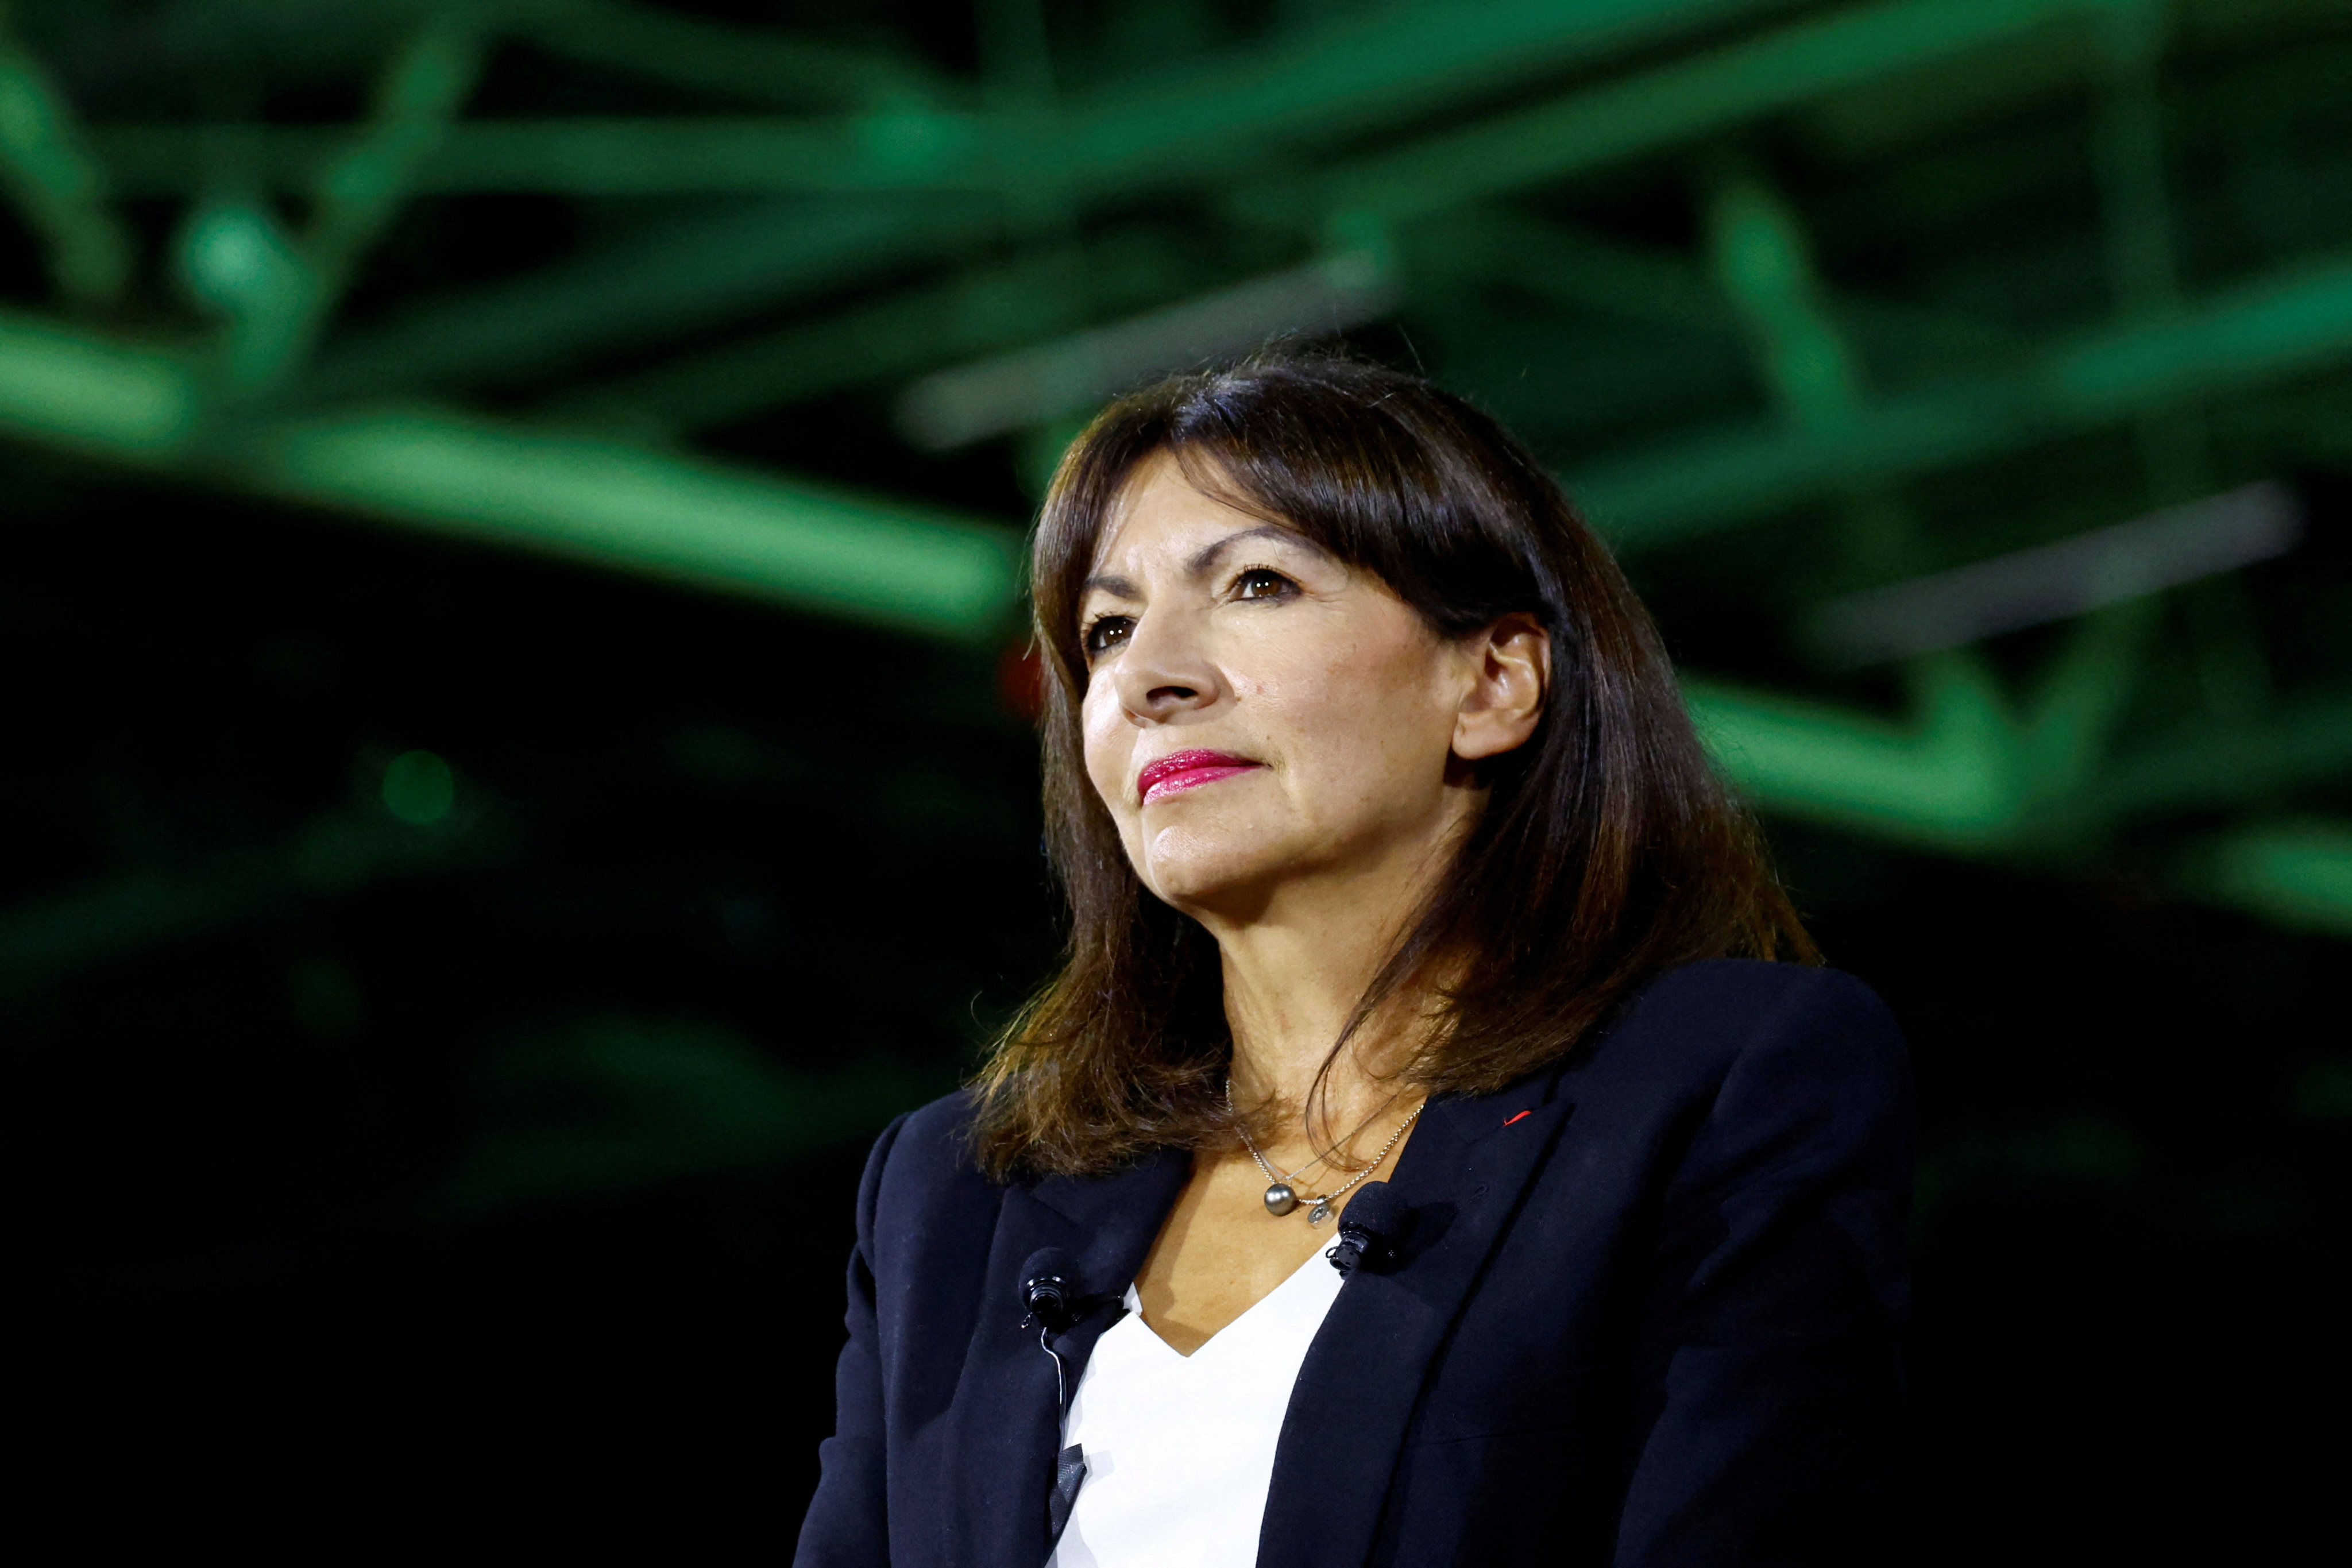 Paris Mayor Anne Hidalgo said she was quitting Elon Musk’s social media platform X, formerly known as Twitter, which she described as a “global sewer” and a tool to disrupt democracy. Photo: Reuters